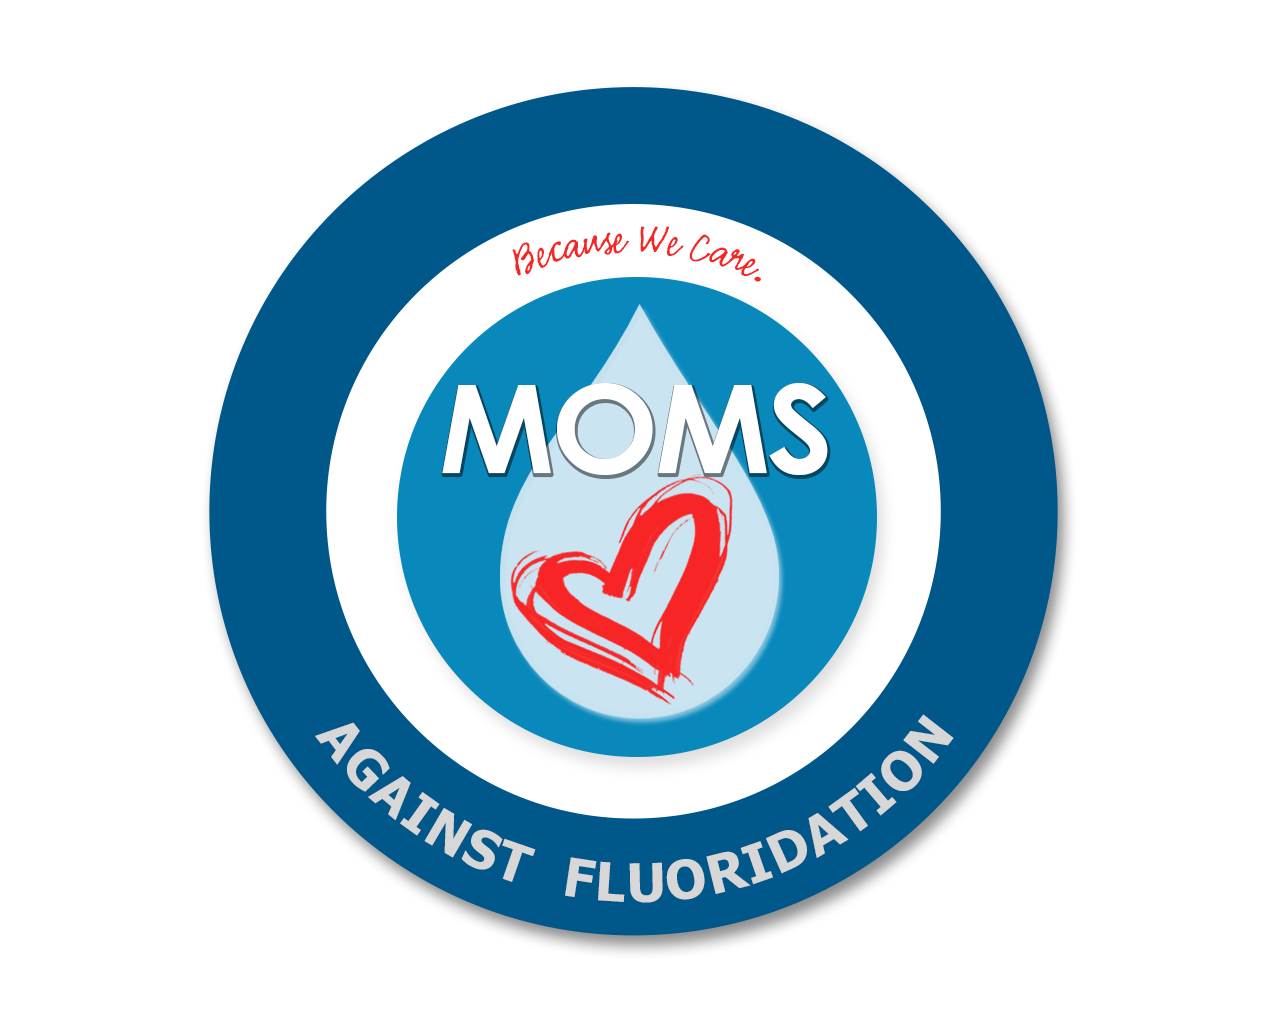 The nonprofit Moms Against Fluoridation is proud to support Andrew Young’s call for hearings and call for a repeal.